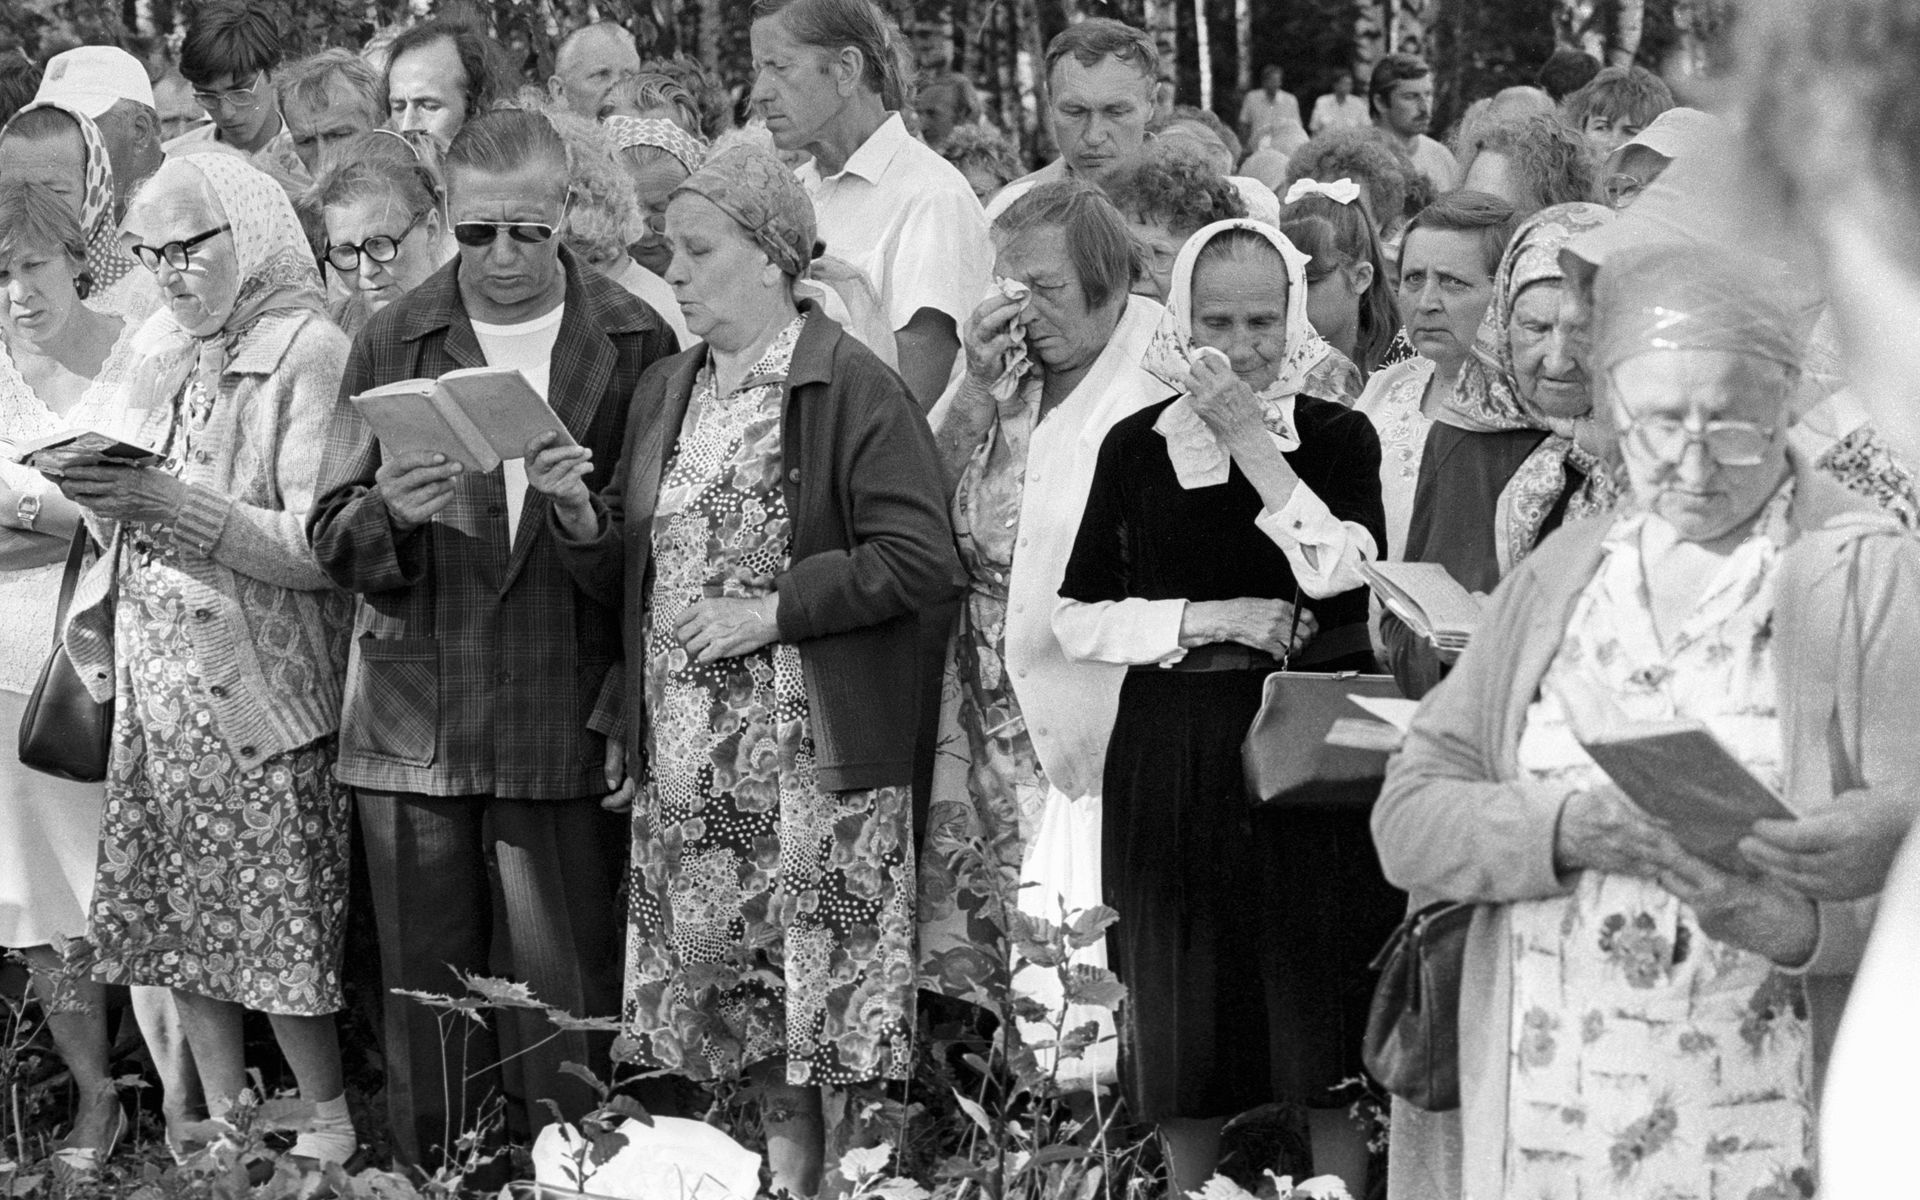 Ingermanland Finns attend a memorial service for tens of thousands of their people destroyed by Stalin's genocidal policies at an old Finnish cemetery in Koltushi village on June 24, 1989. (Image: RIAN)